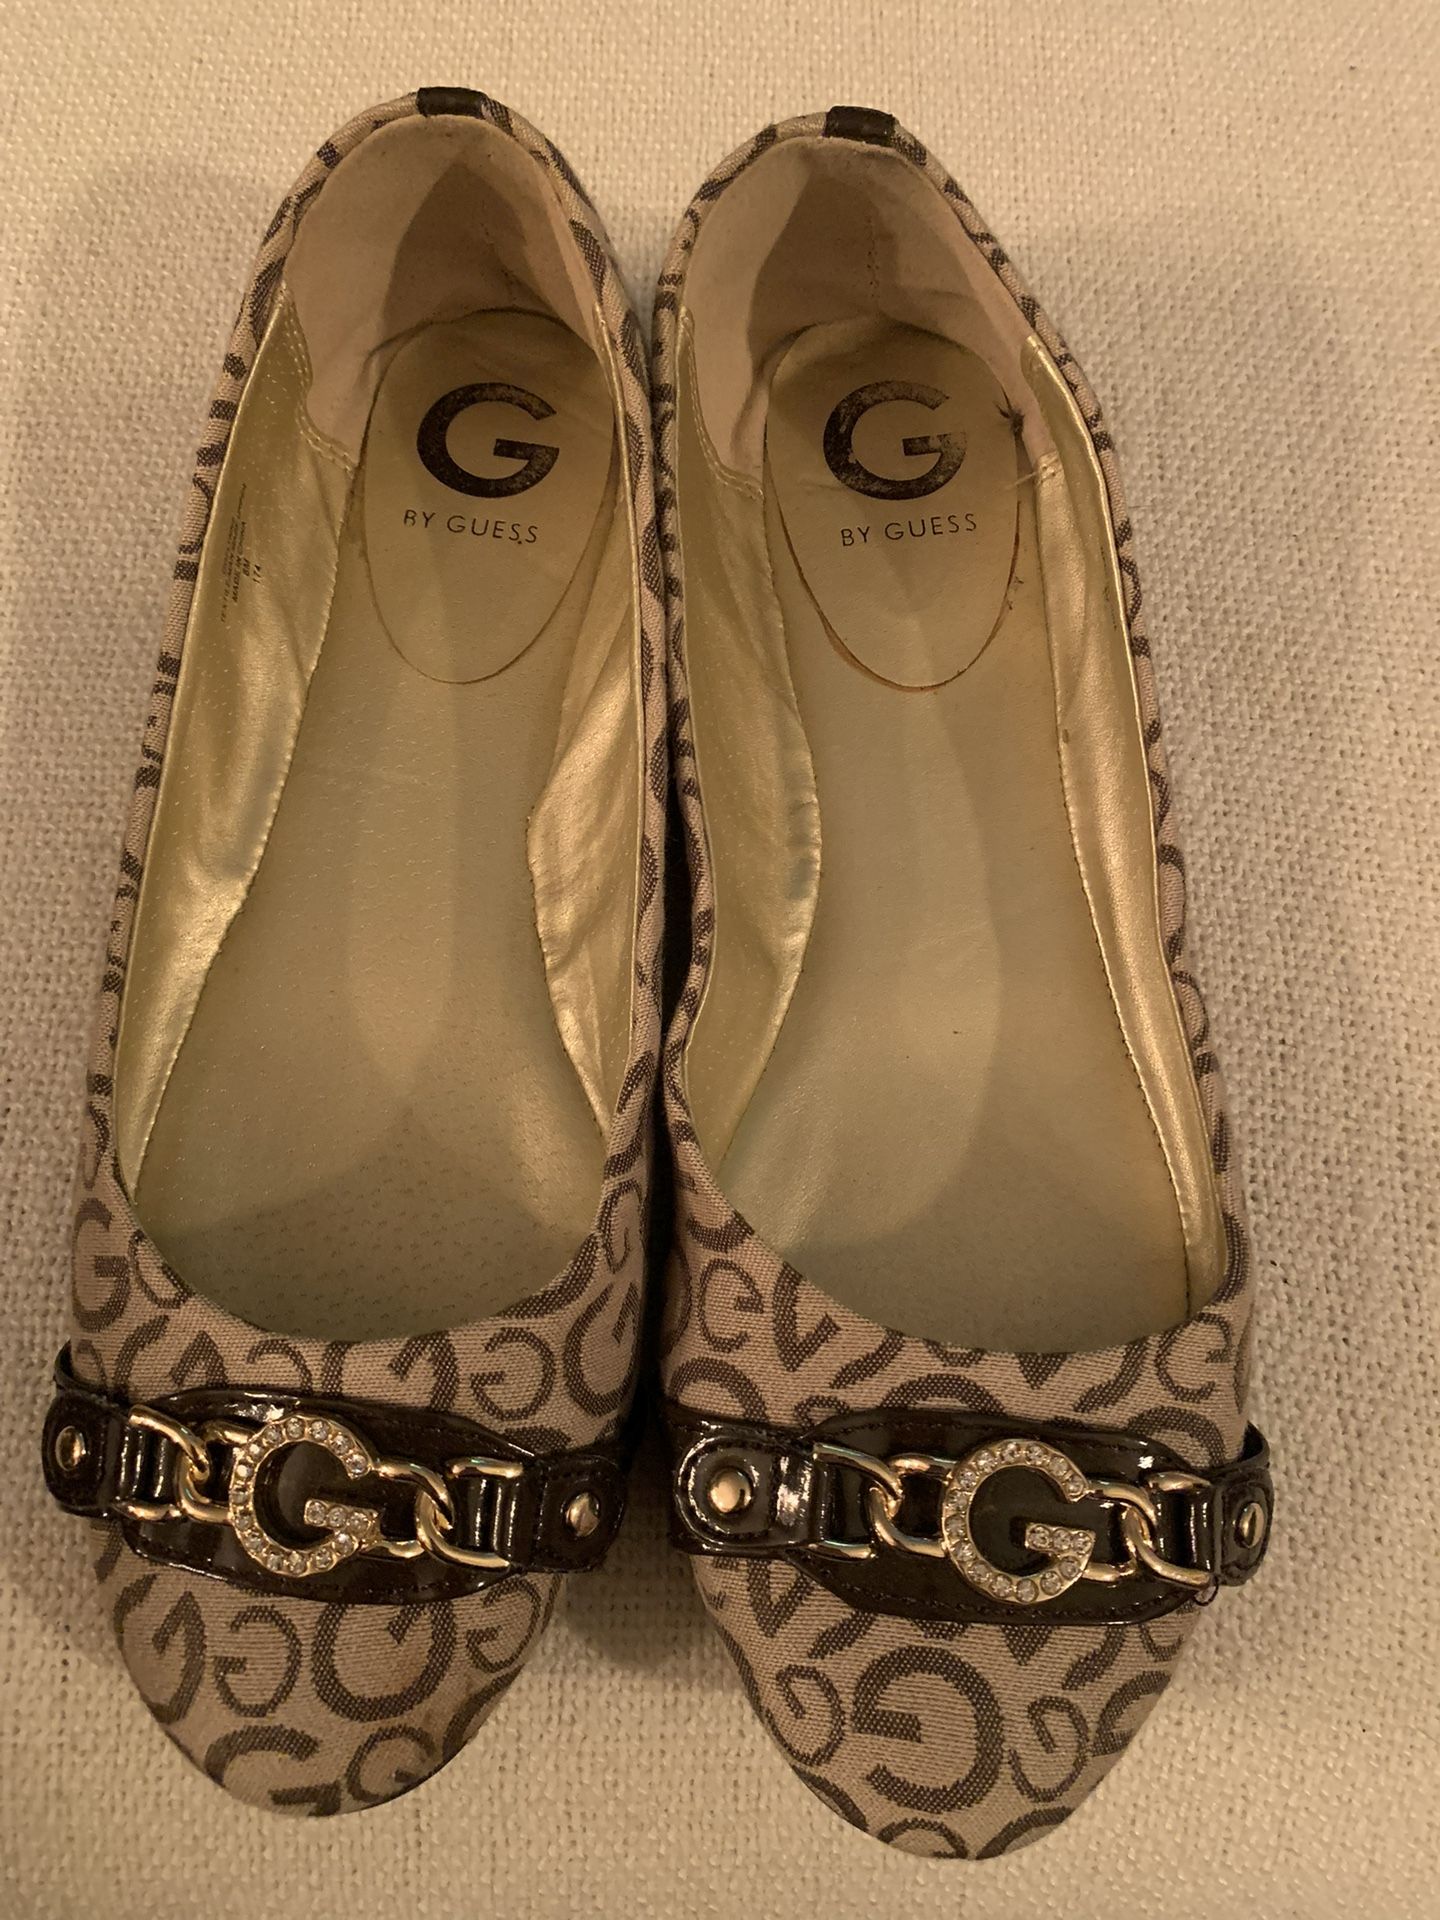 Guess beige & brown flats size 8